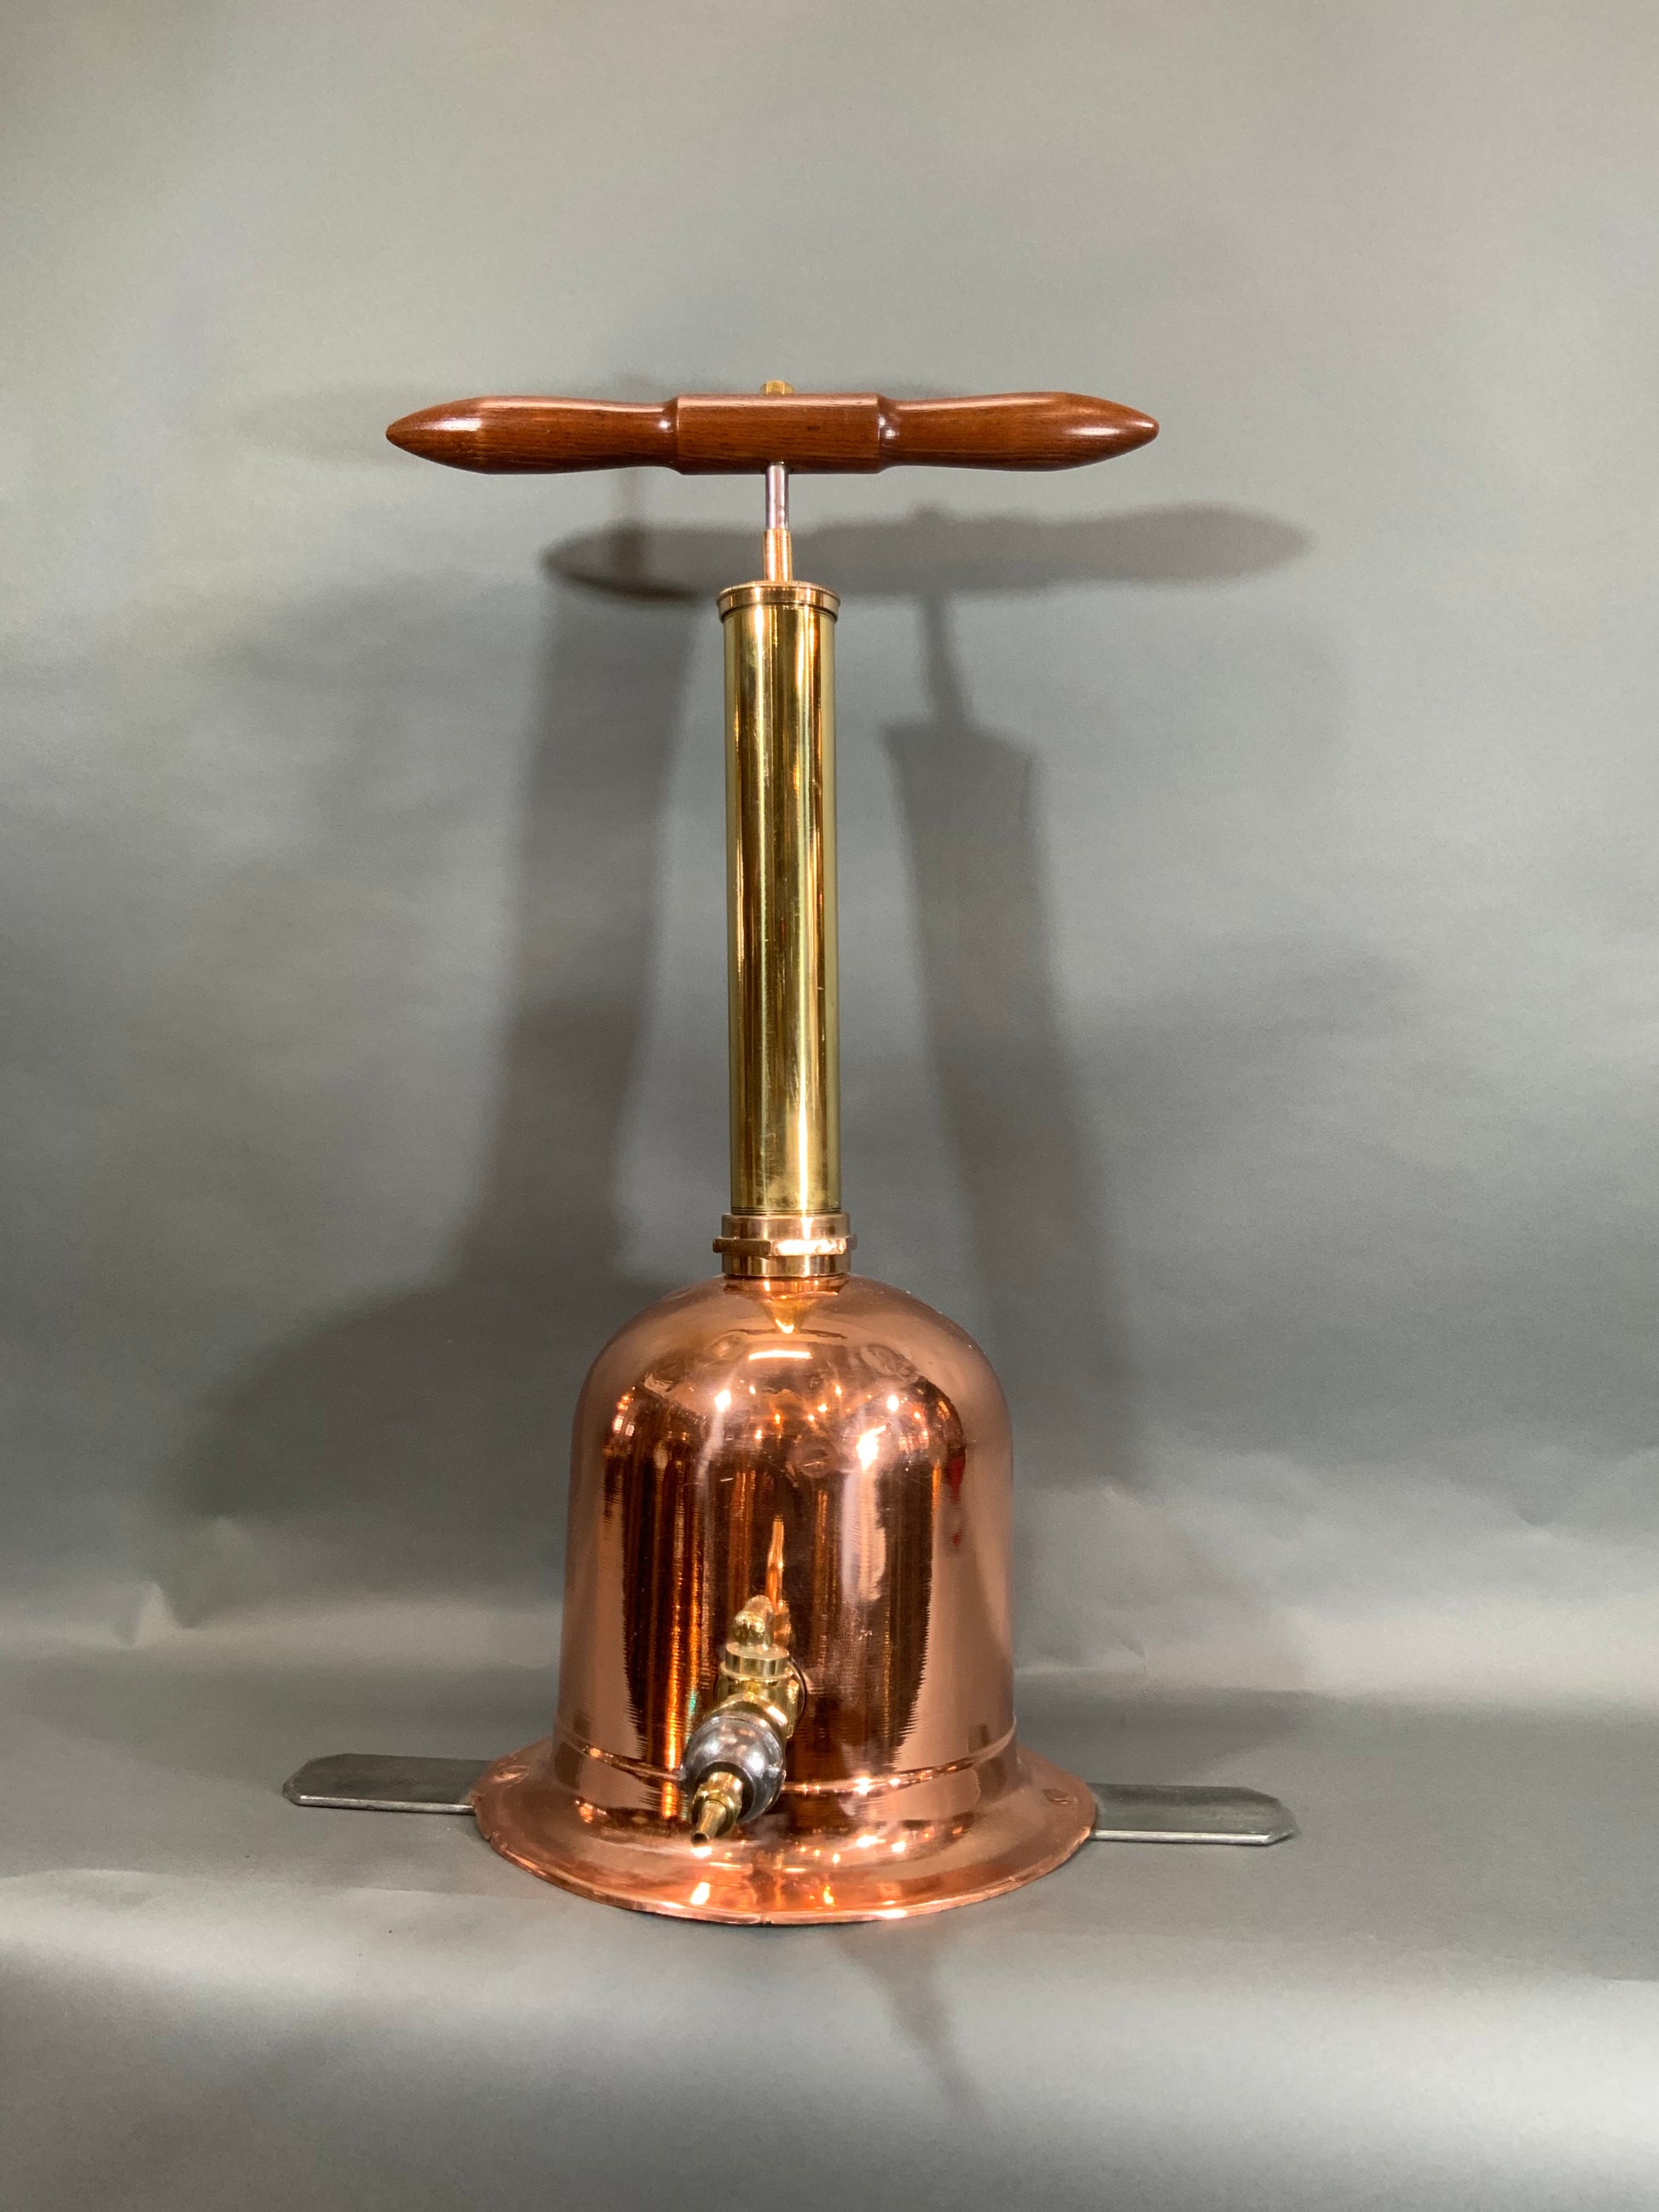 Copper and Brass Fresh Air Diver's Pump with Wood Handle - Lannan Gallery